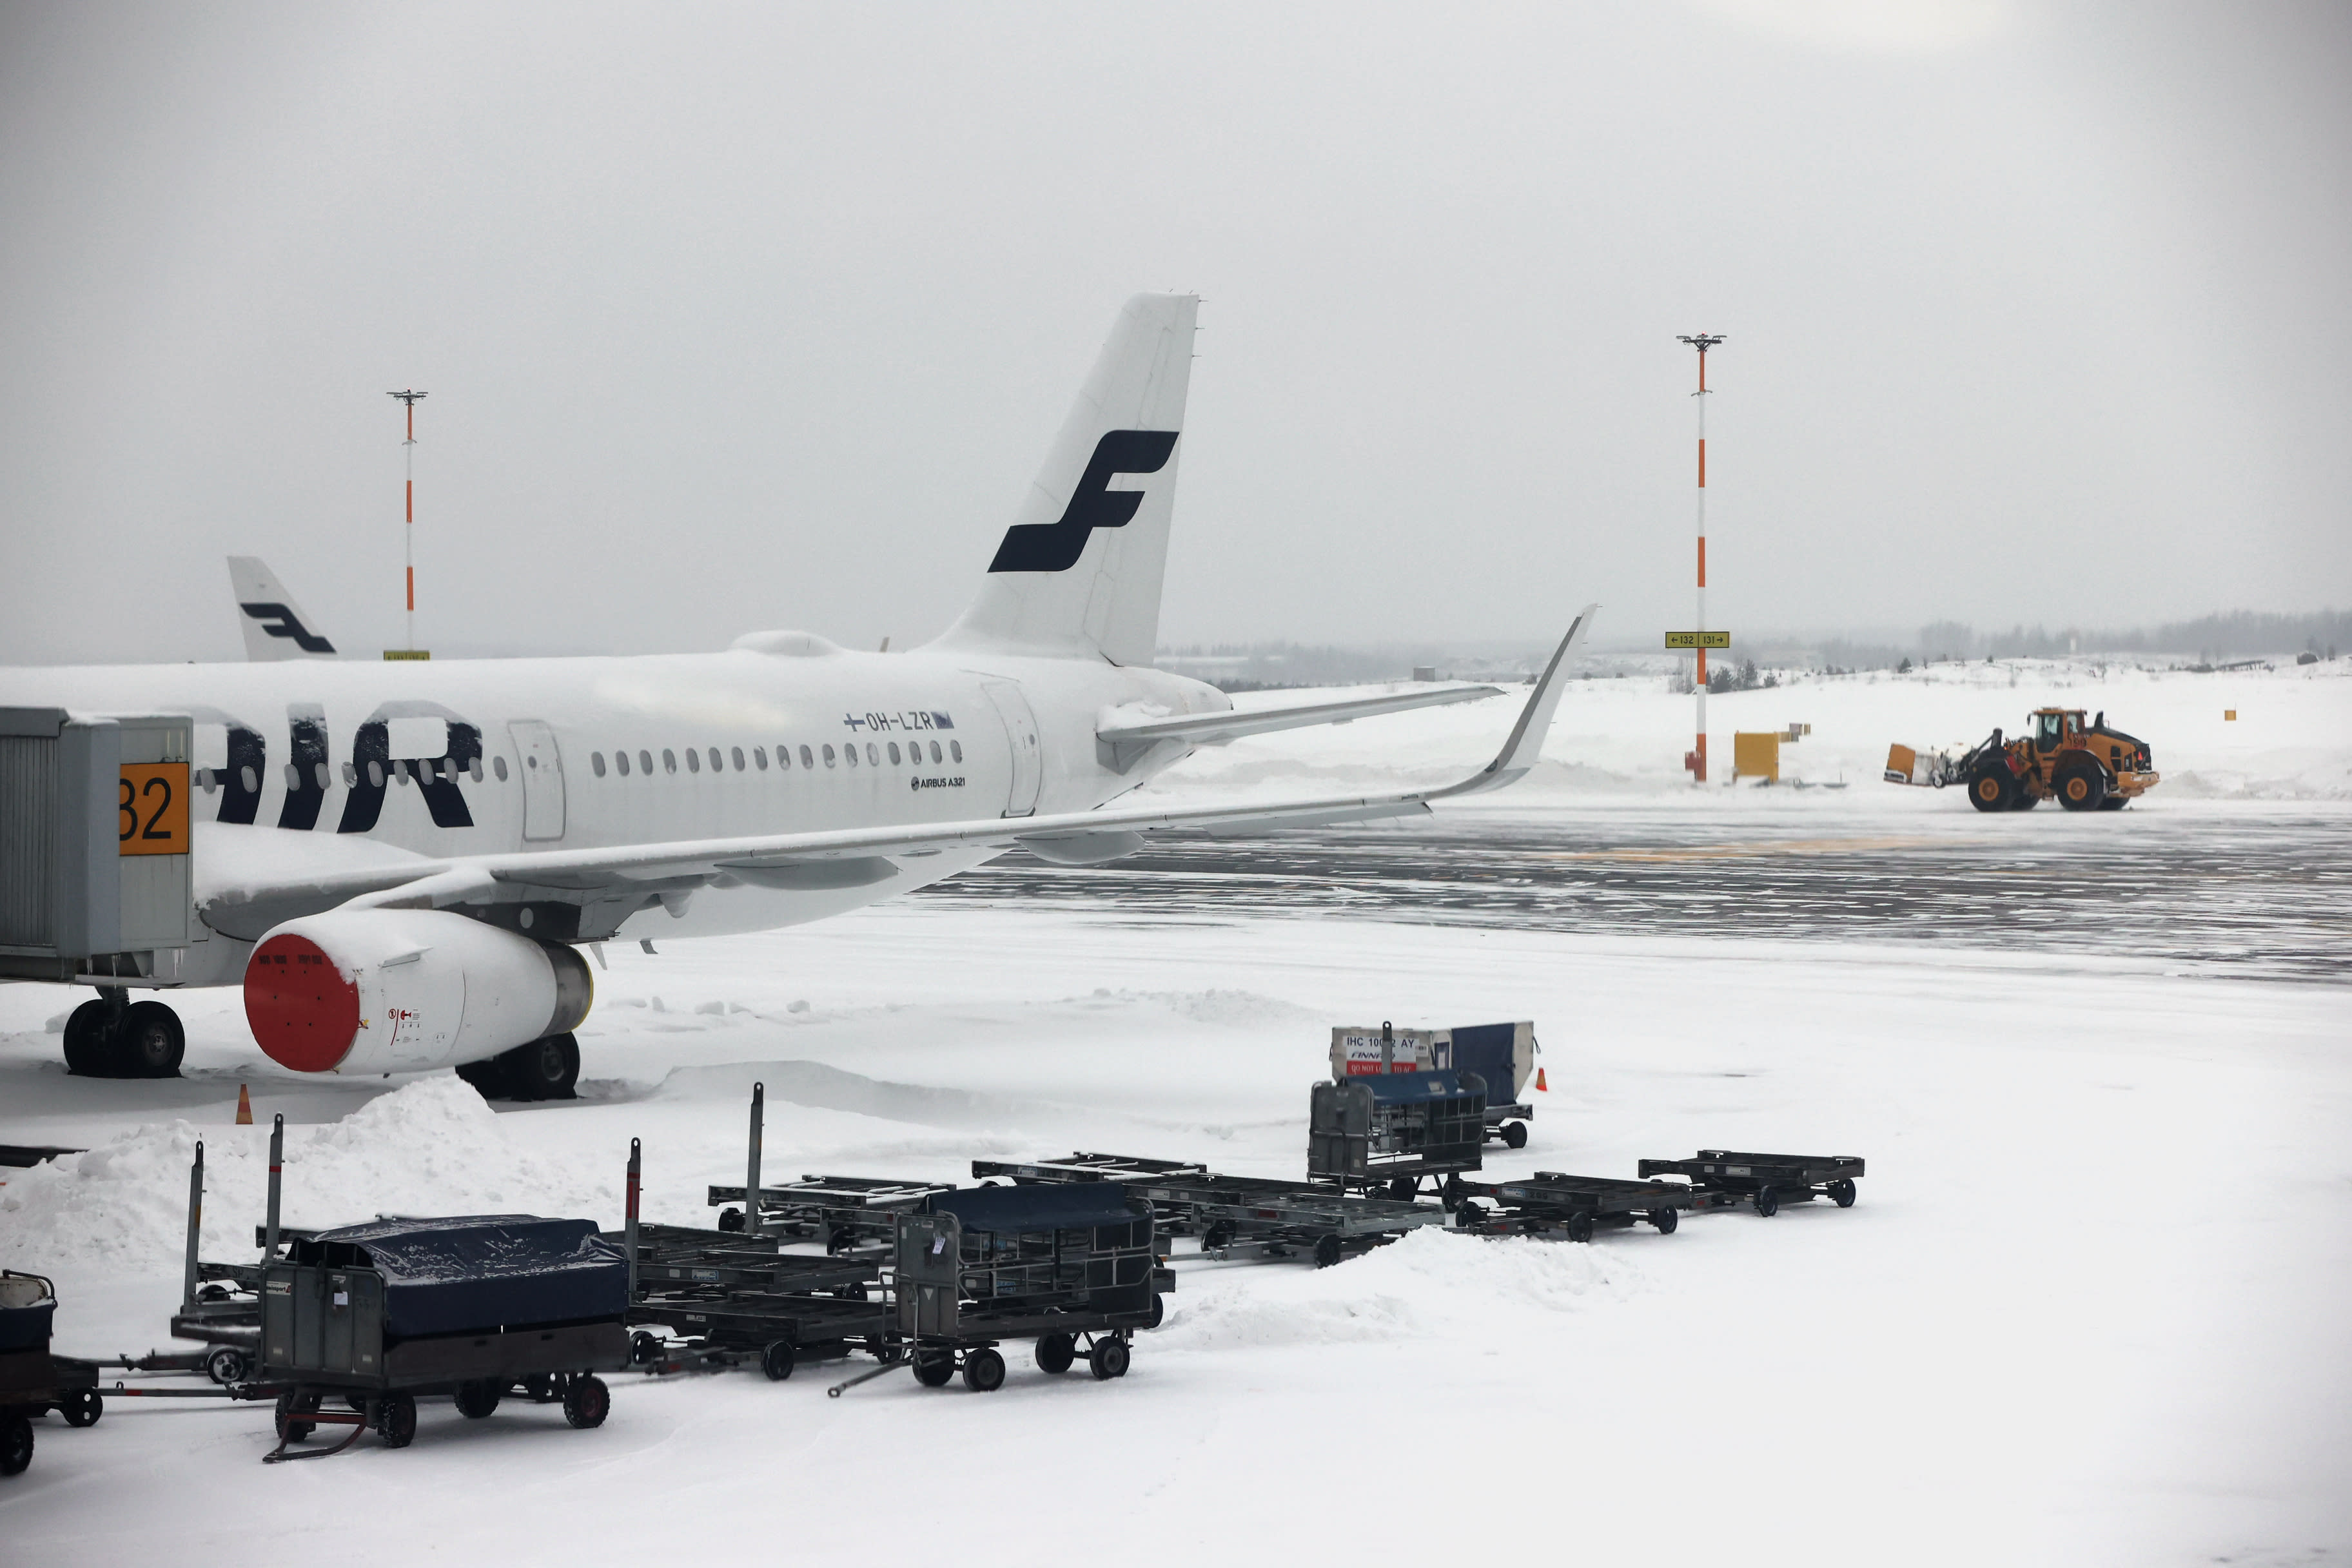 Finnair may have to cancel flights if the flight strike continues